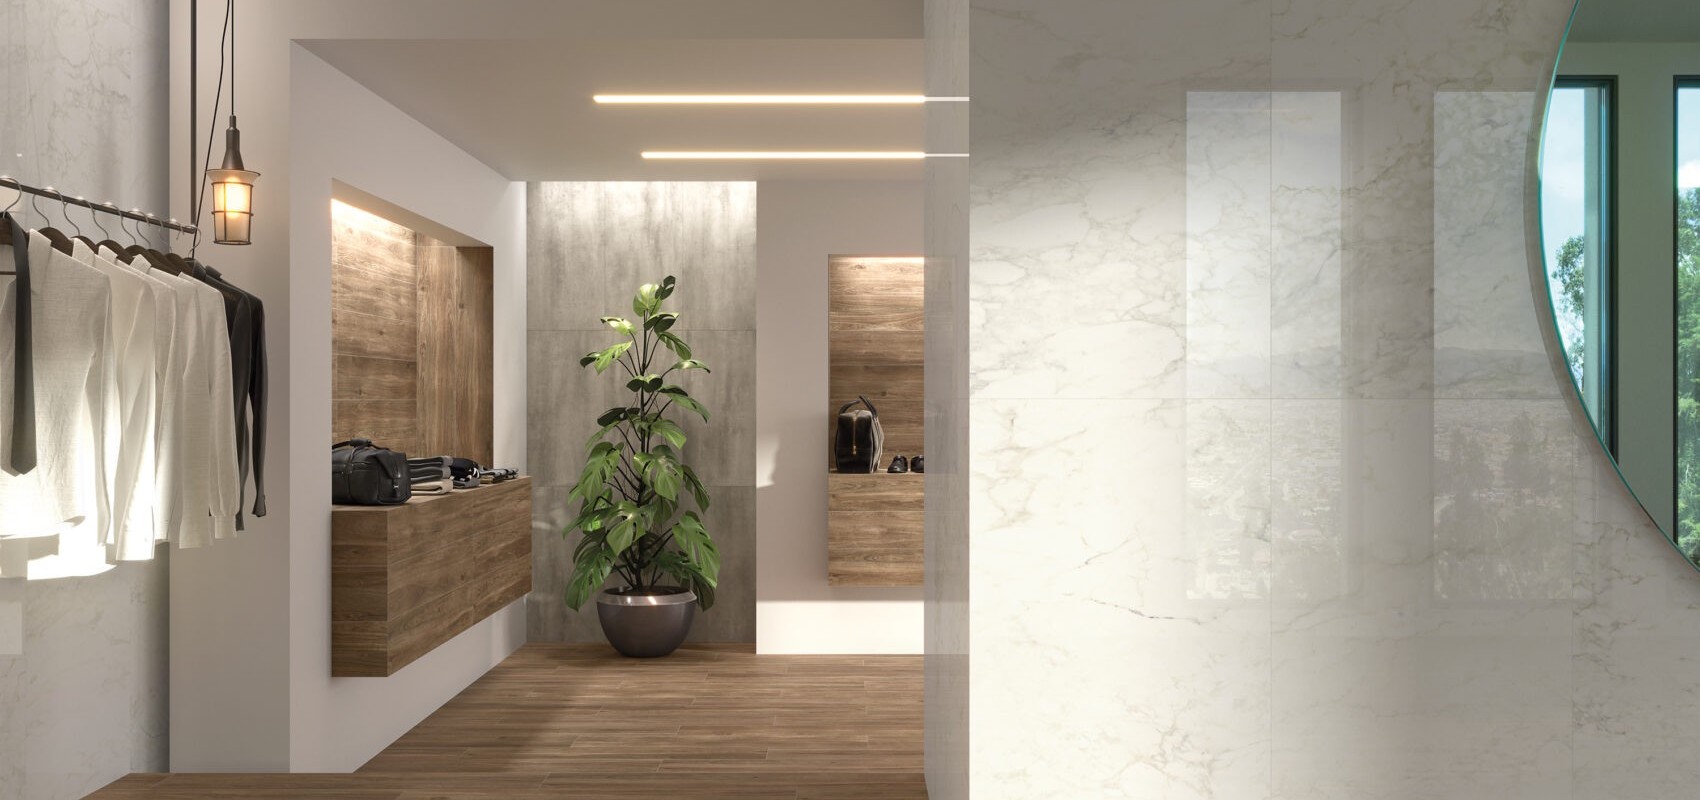 Tile Company Near Scarborough Toronto | Top Ceramic Manufacturers in the World | Top Tiles